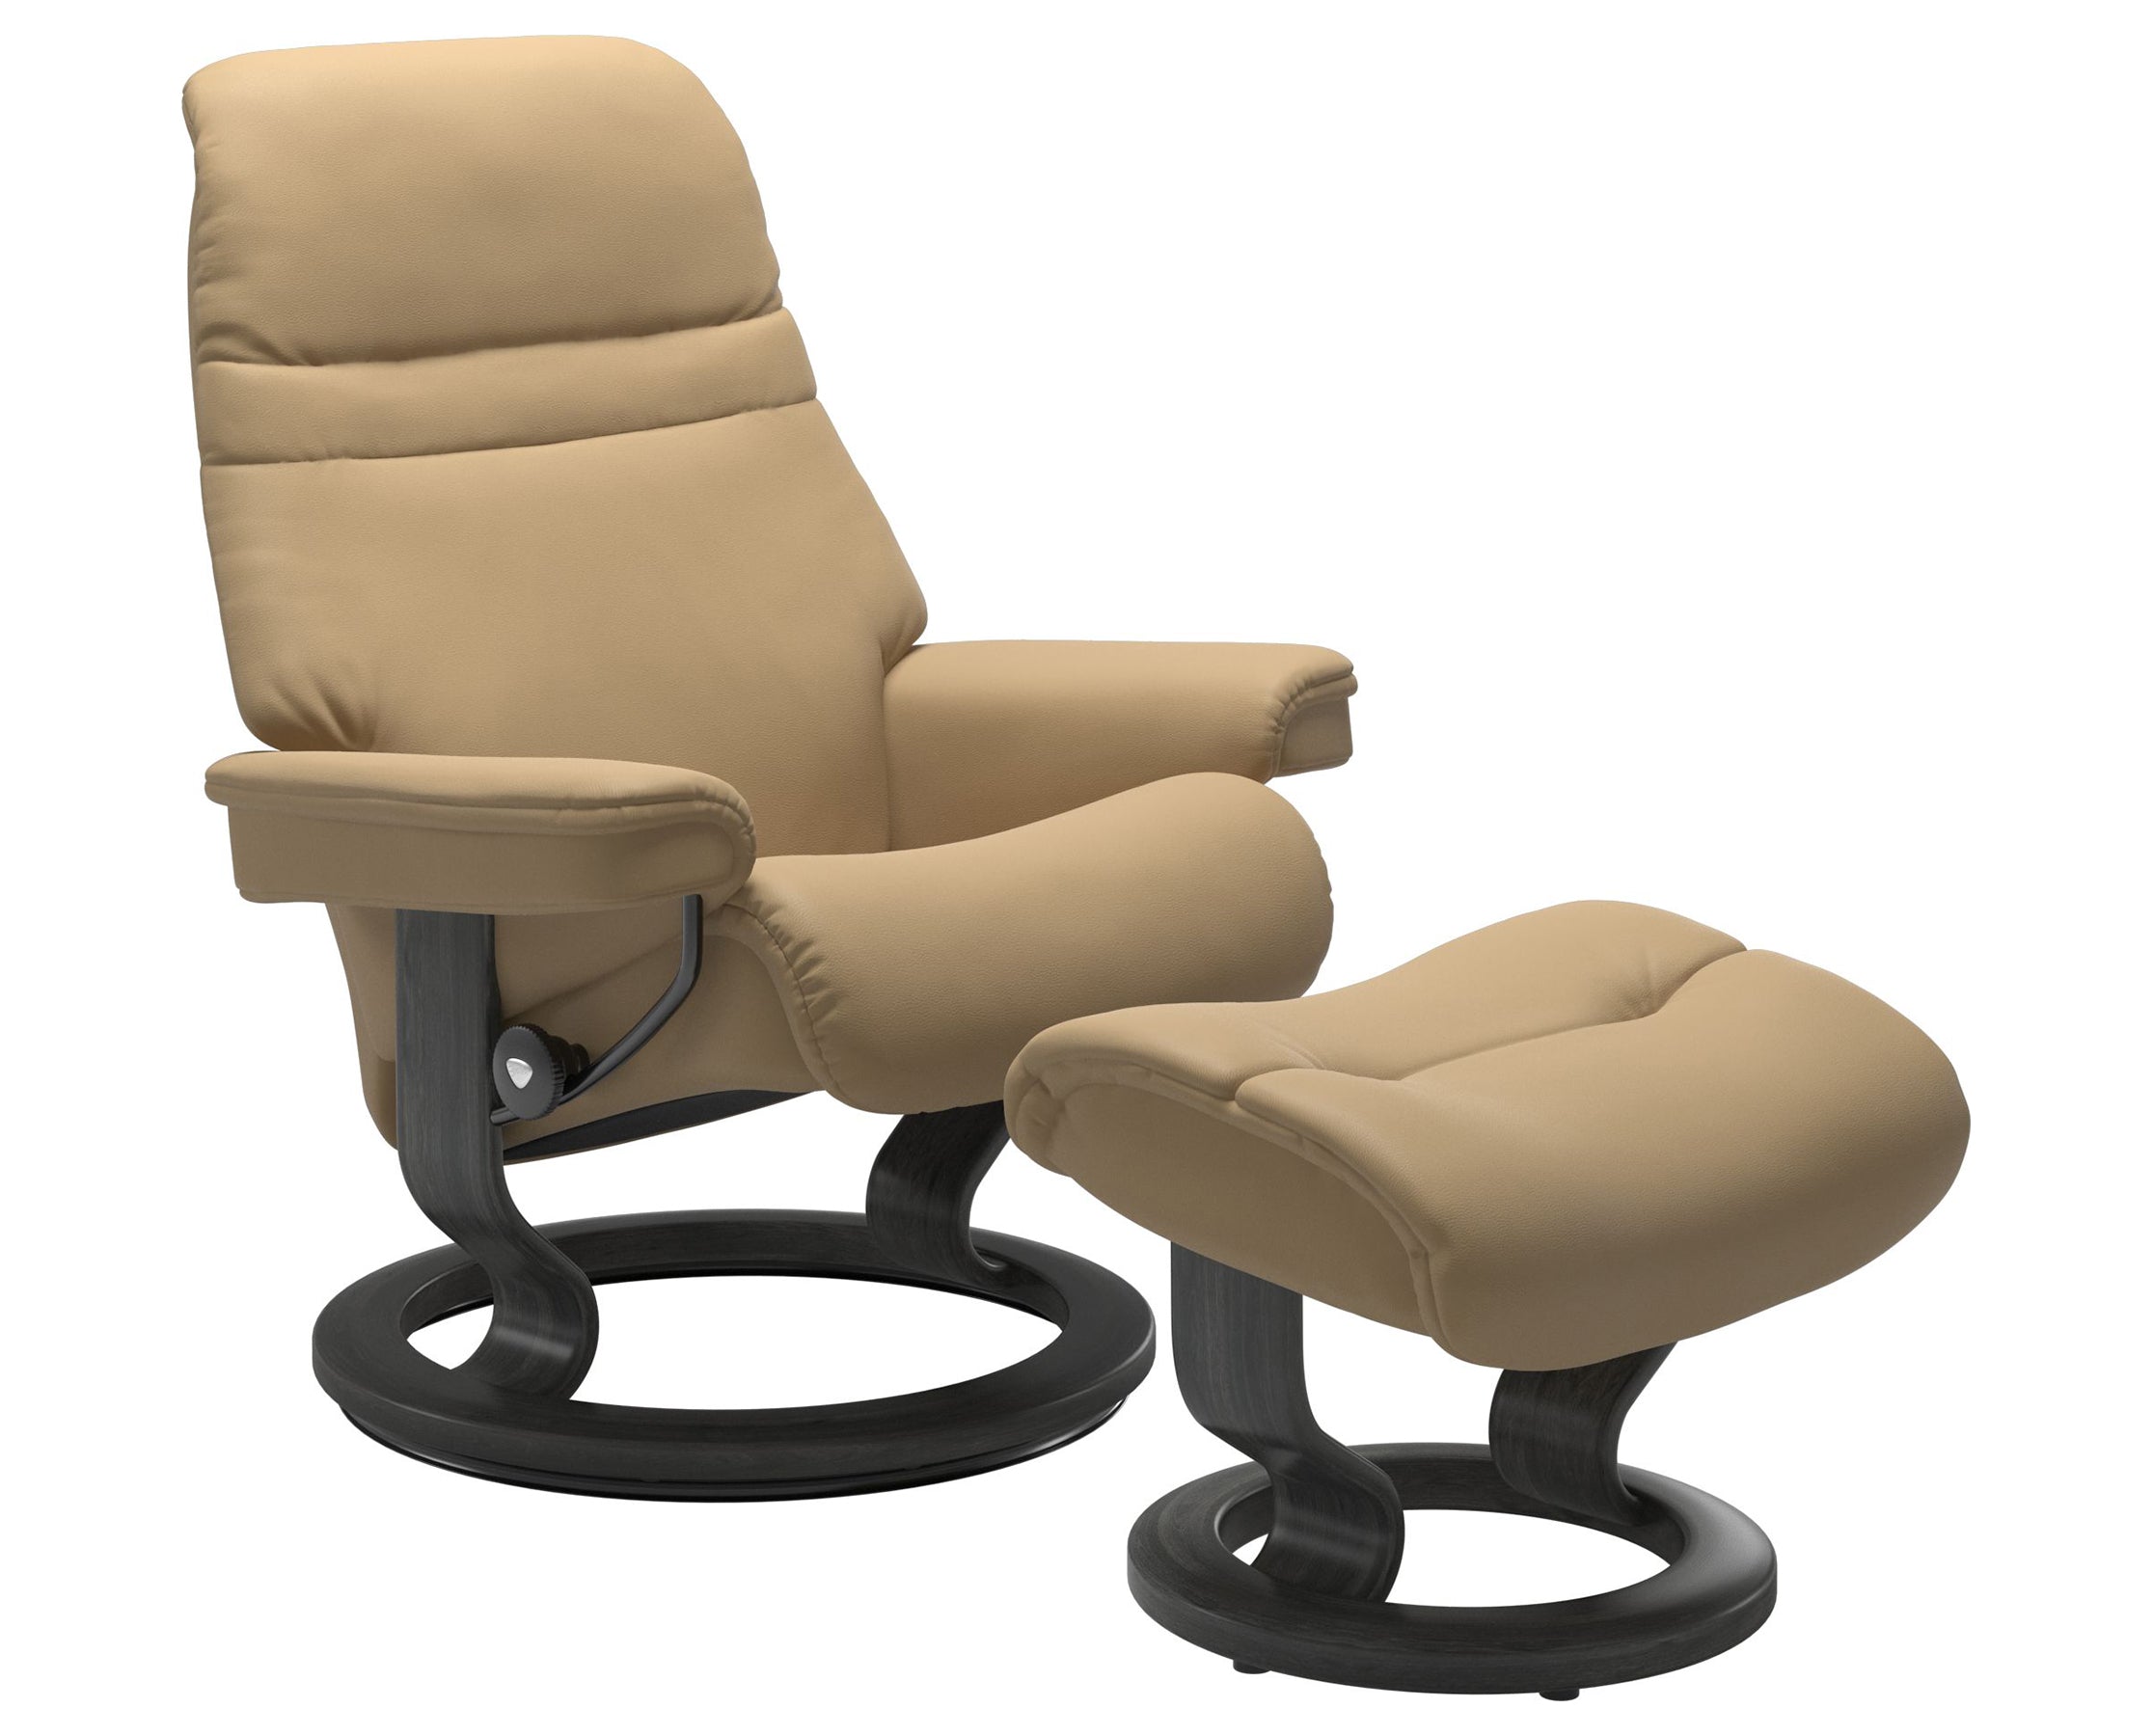 Paloma Leather Sand S/M/L and Grey Base | Stressless Sunrise Classic Recliner | Valley Ridge Furniture